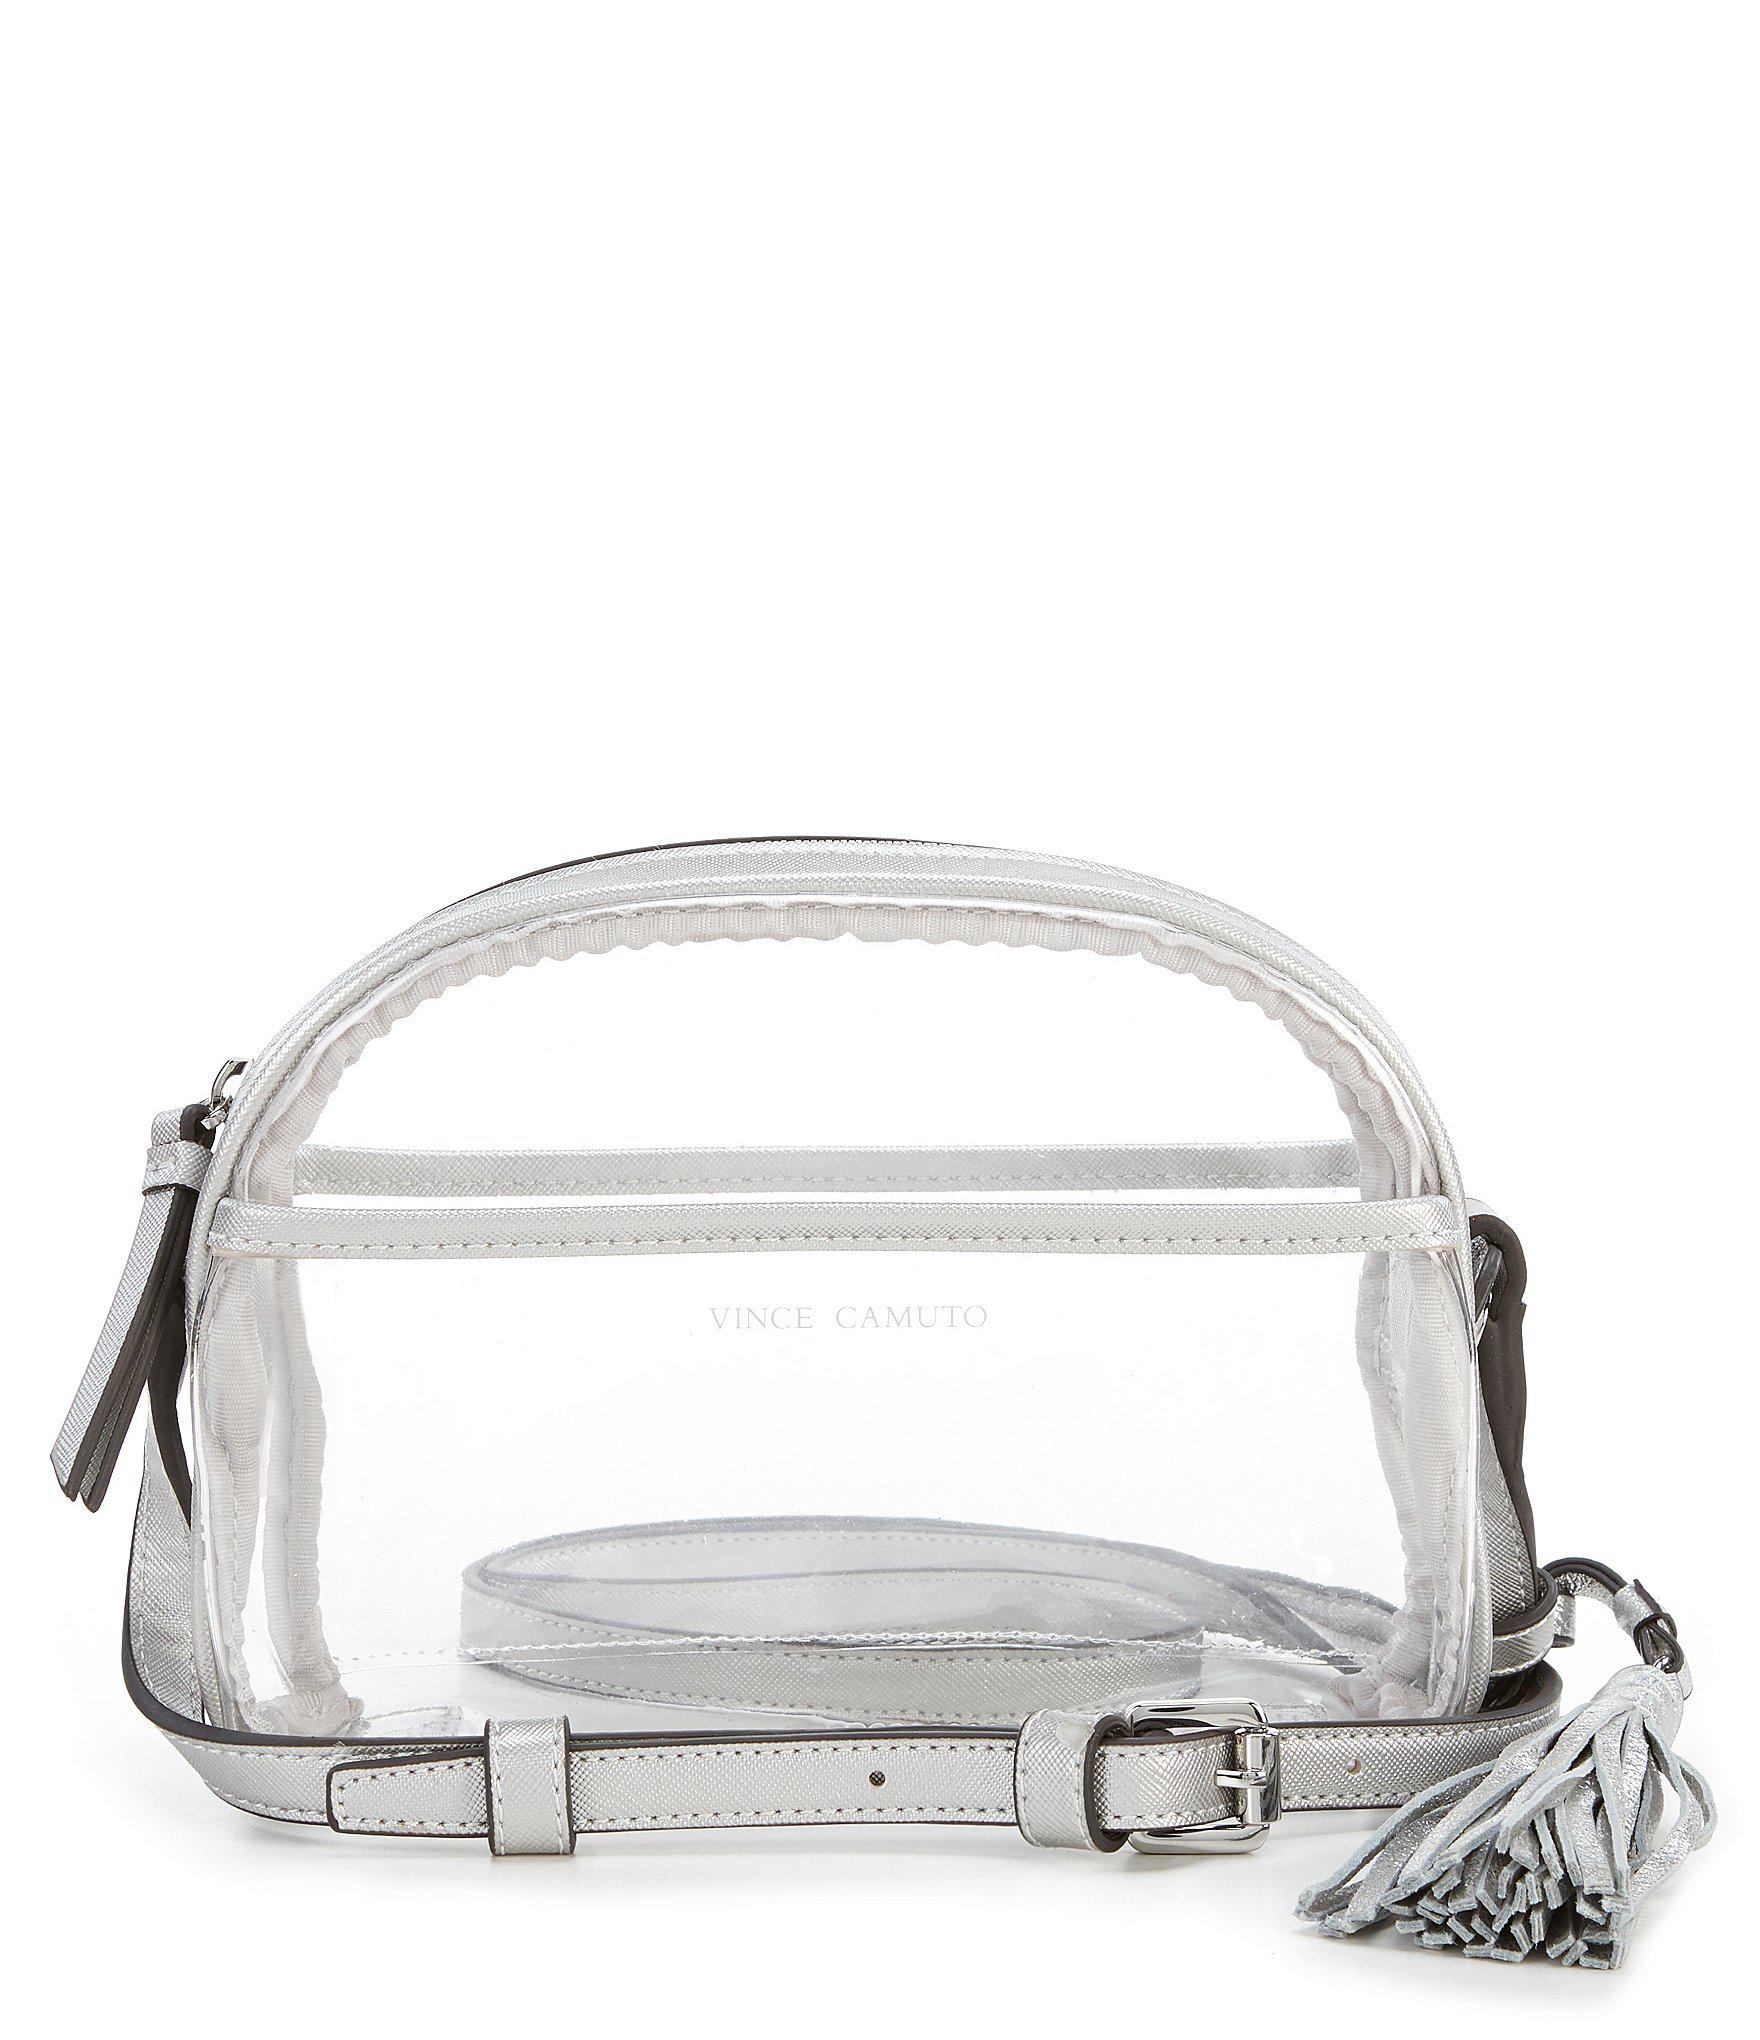 Lyst - Vince Camuto Aryna Clear Cross-body Bag in Metallic